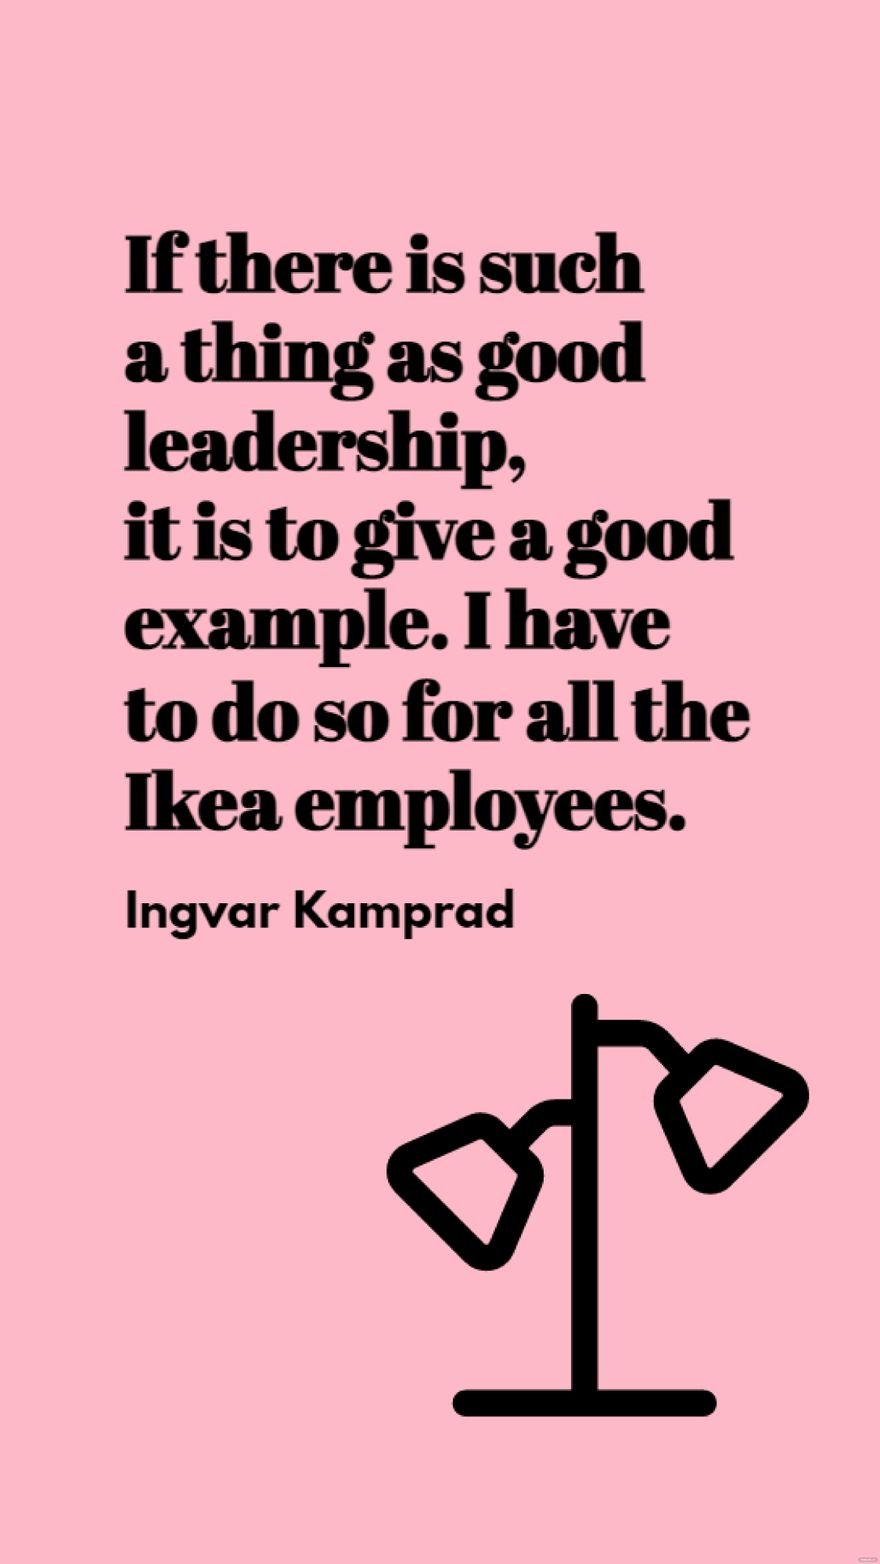 Ingvar Kamprad - If there is such a thing as good leadership, it is to give a good example. I have to do so for all the Ikea employees. in JPG